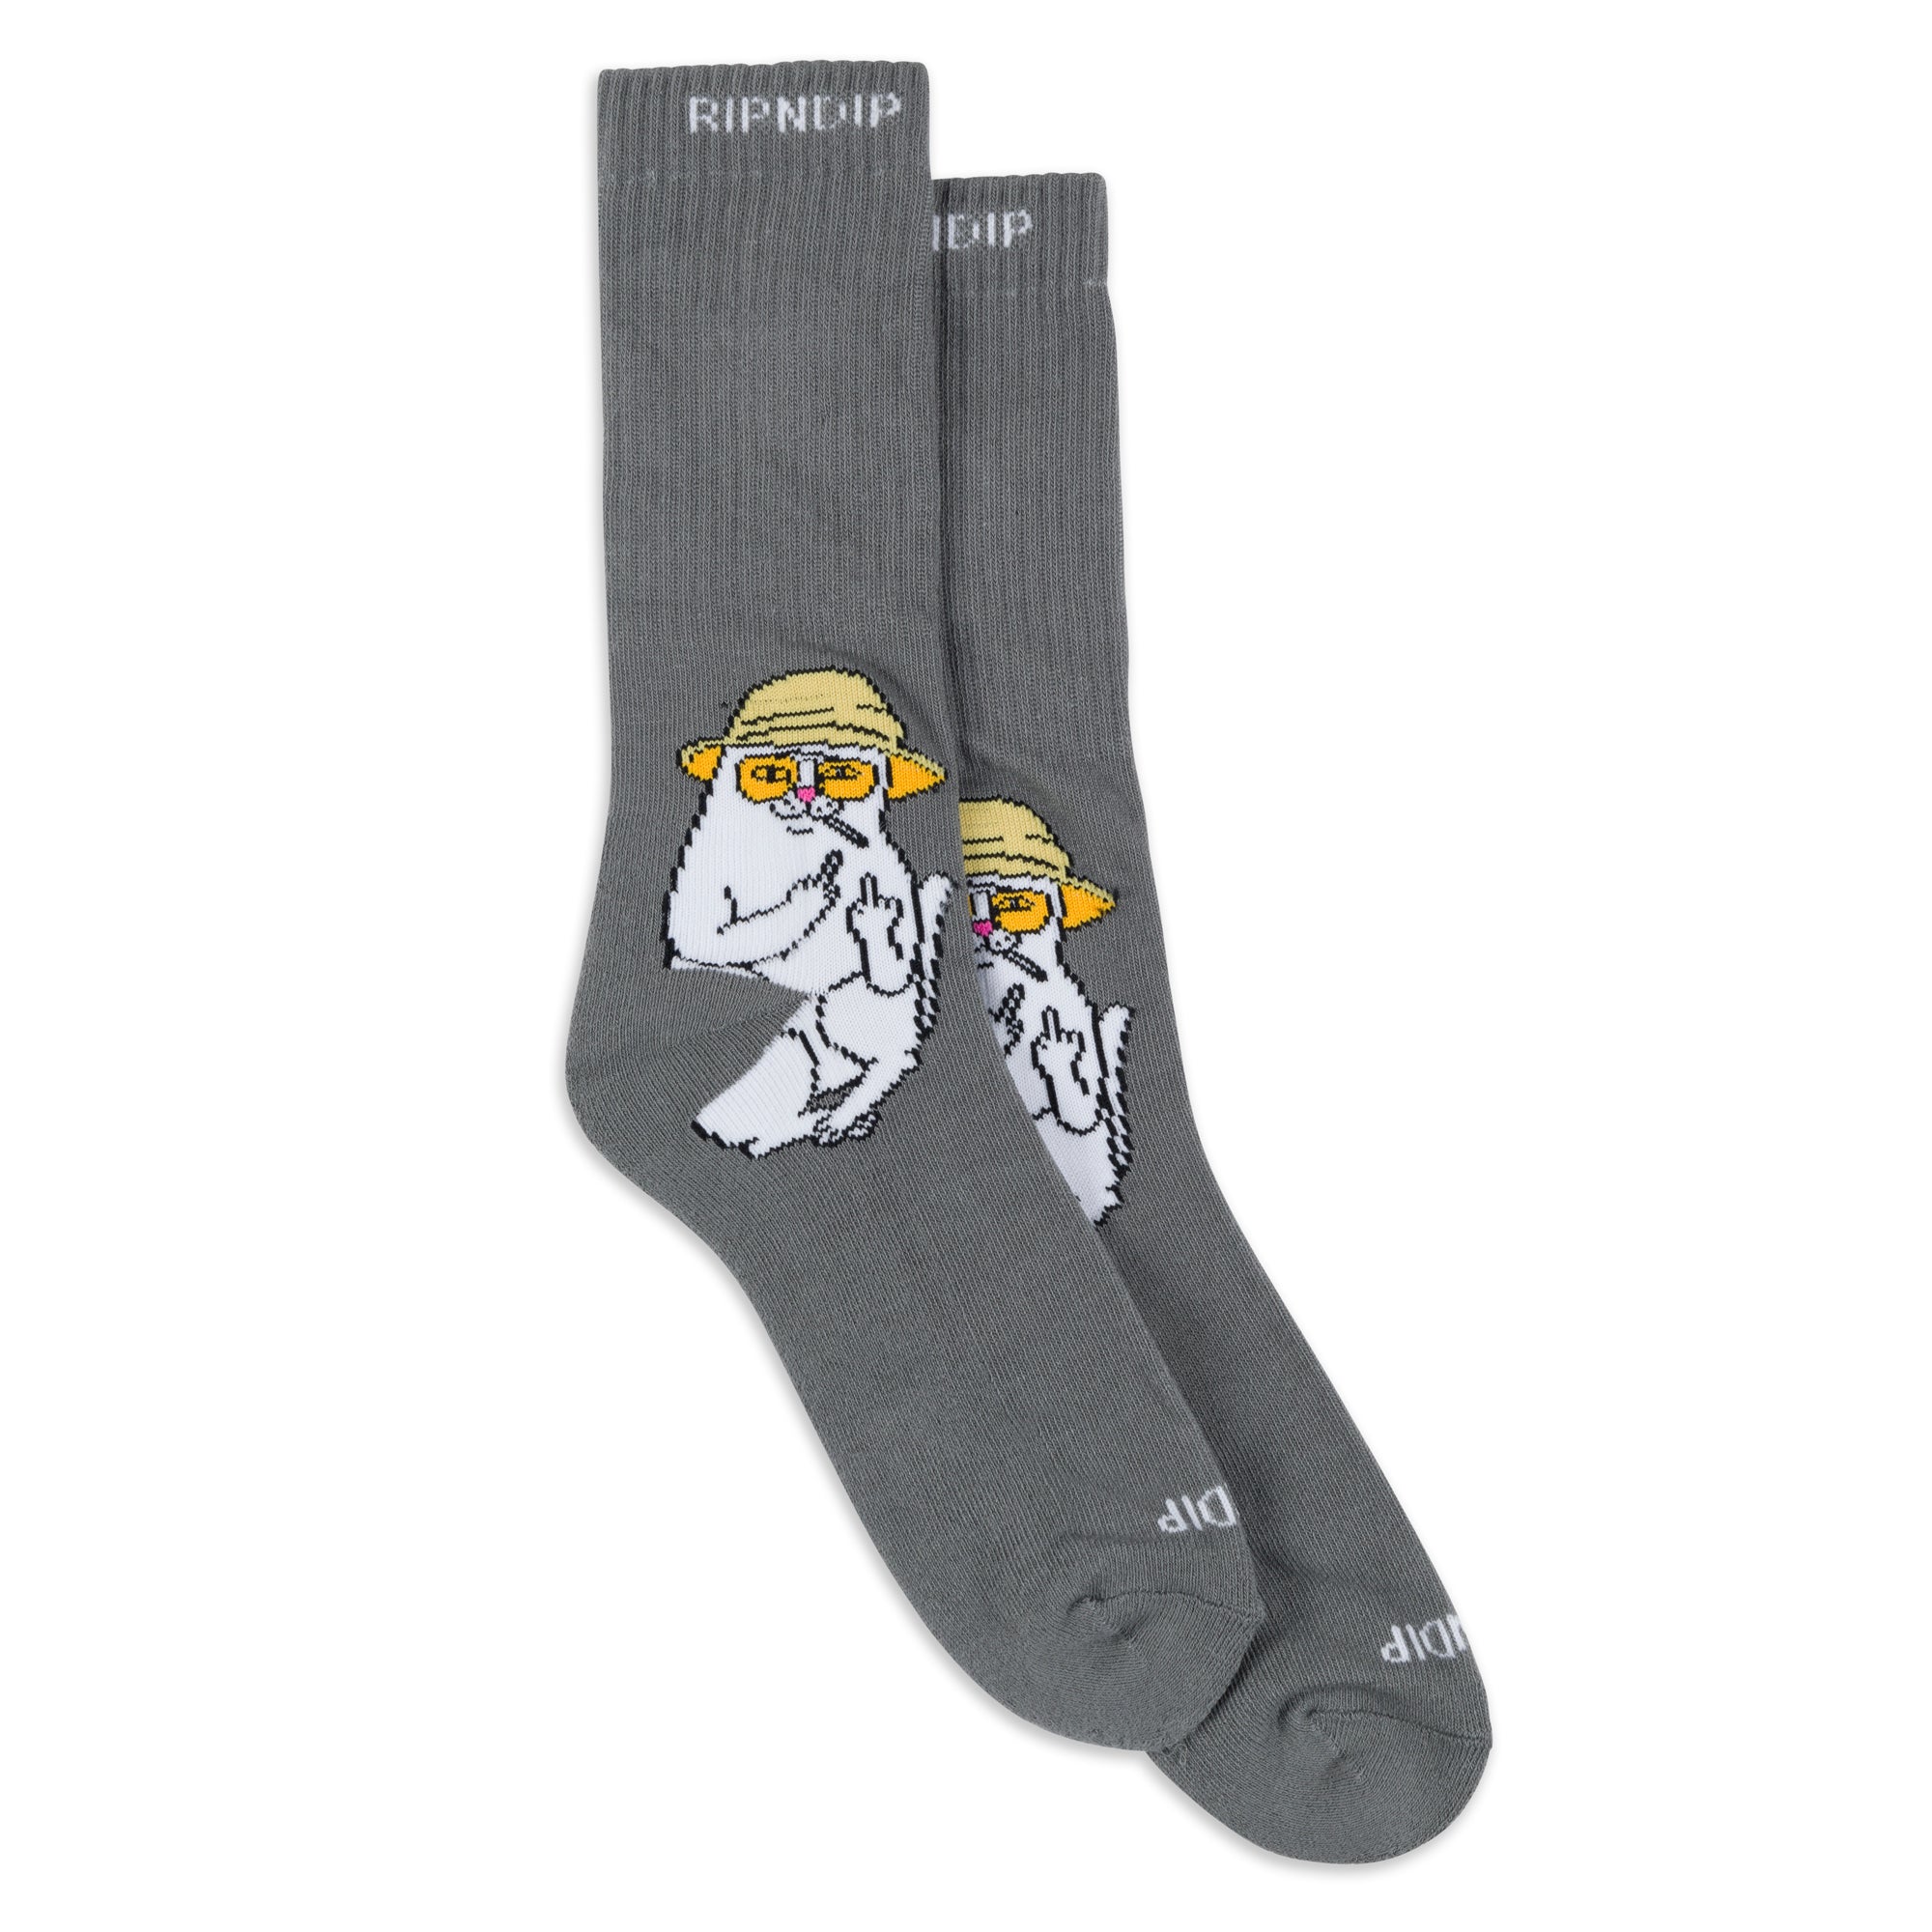 Calcetines Hombre  Ripndip Welcome To Heck Calcetines Negros Y